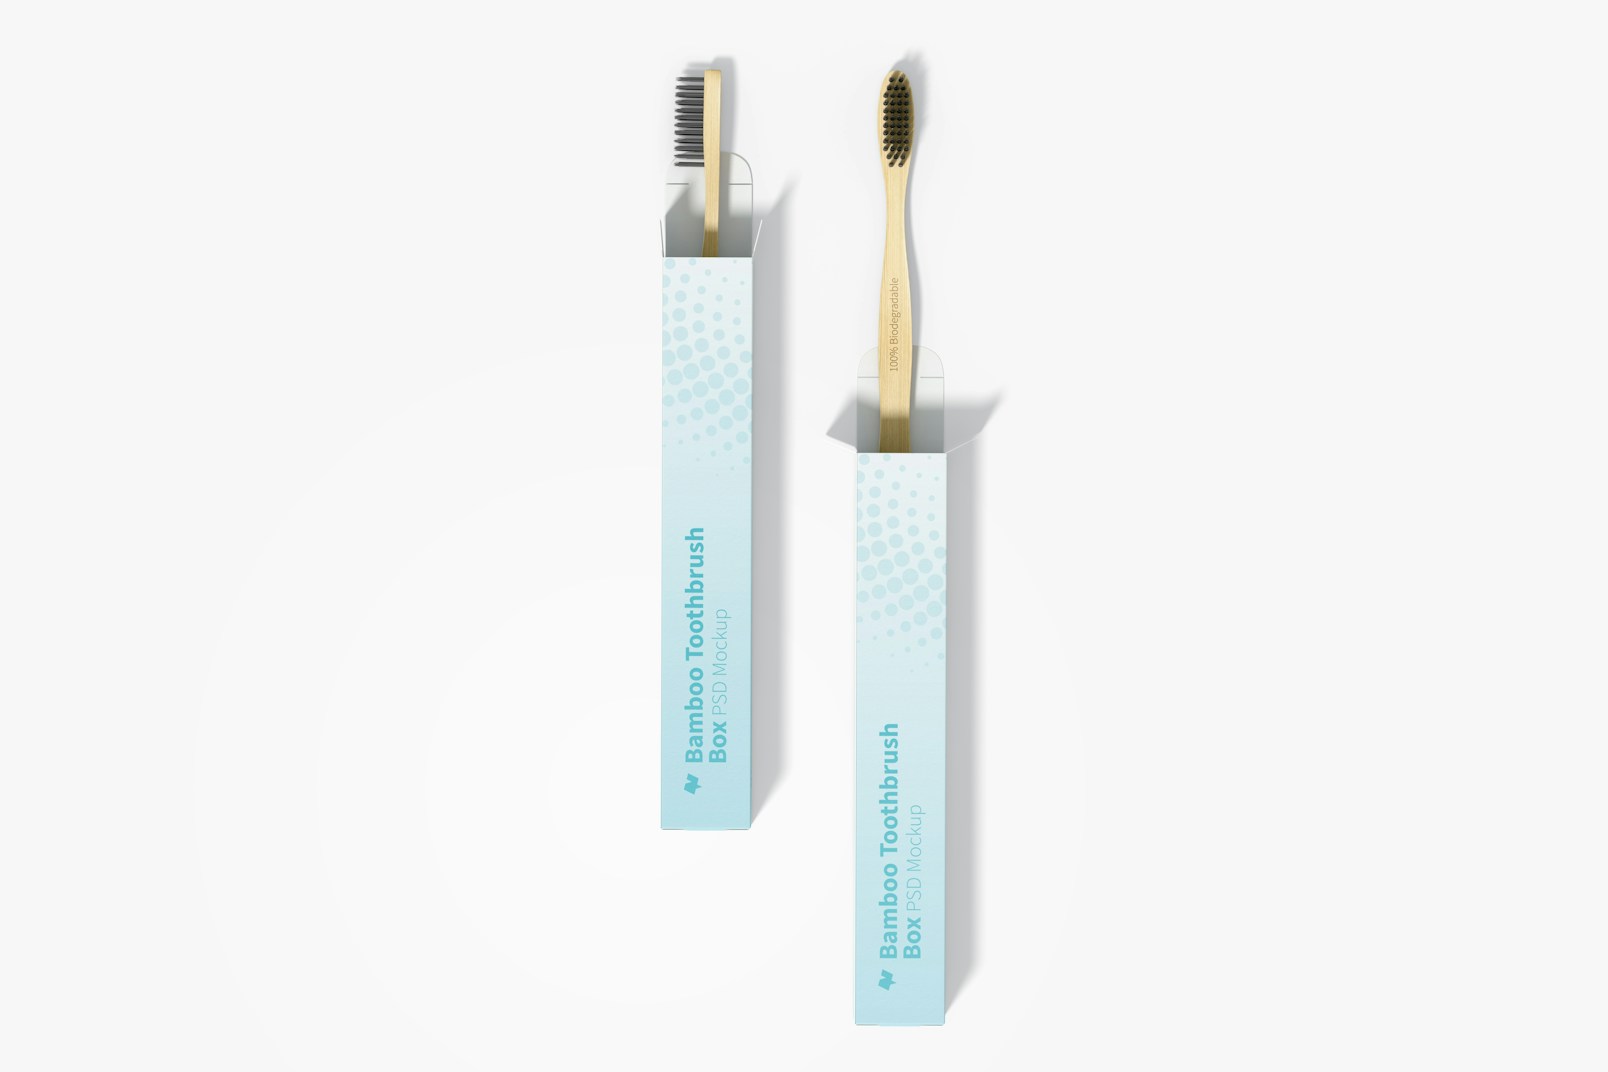 Bamboo Toothbrushes with Box Mockup, Top View